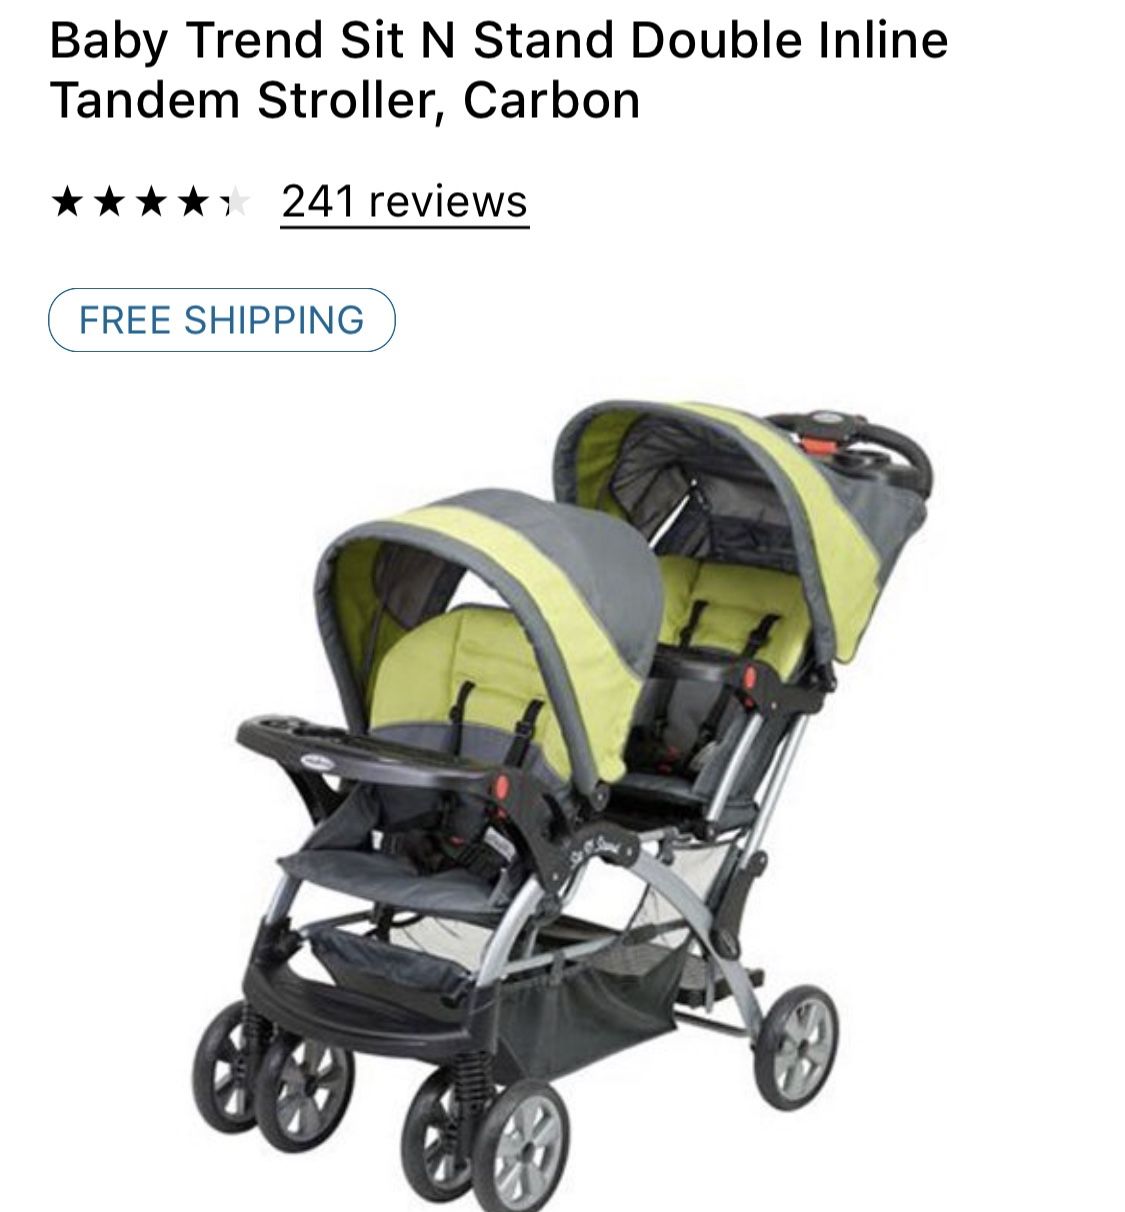 Brand new baby trend double stroller